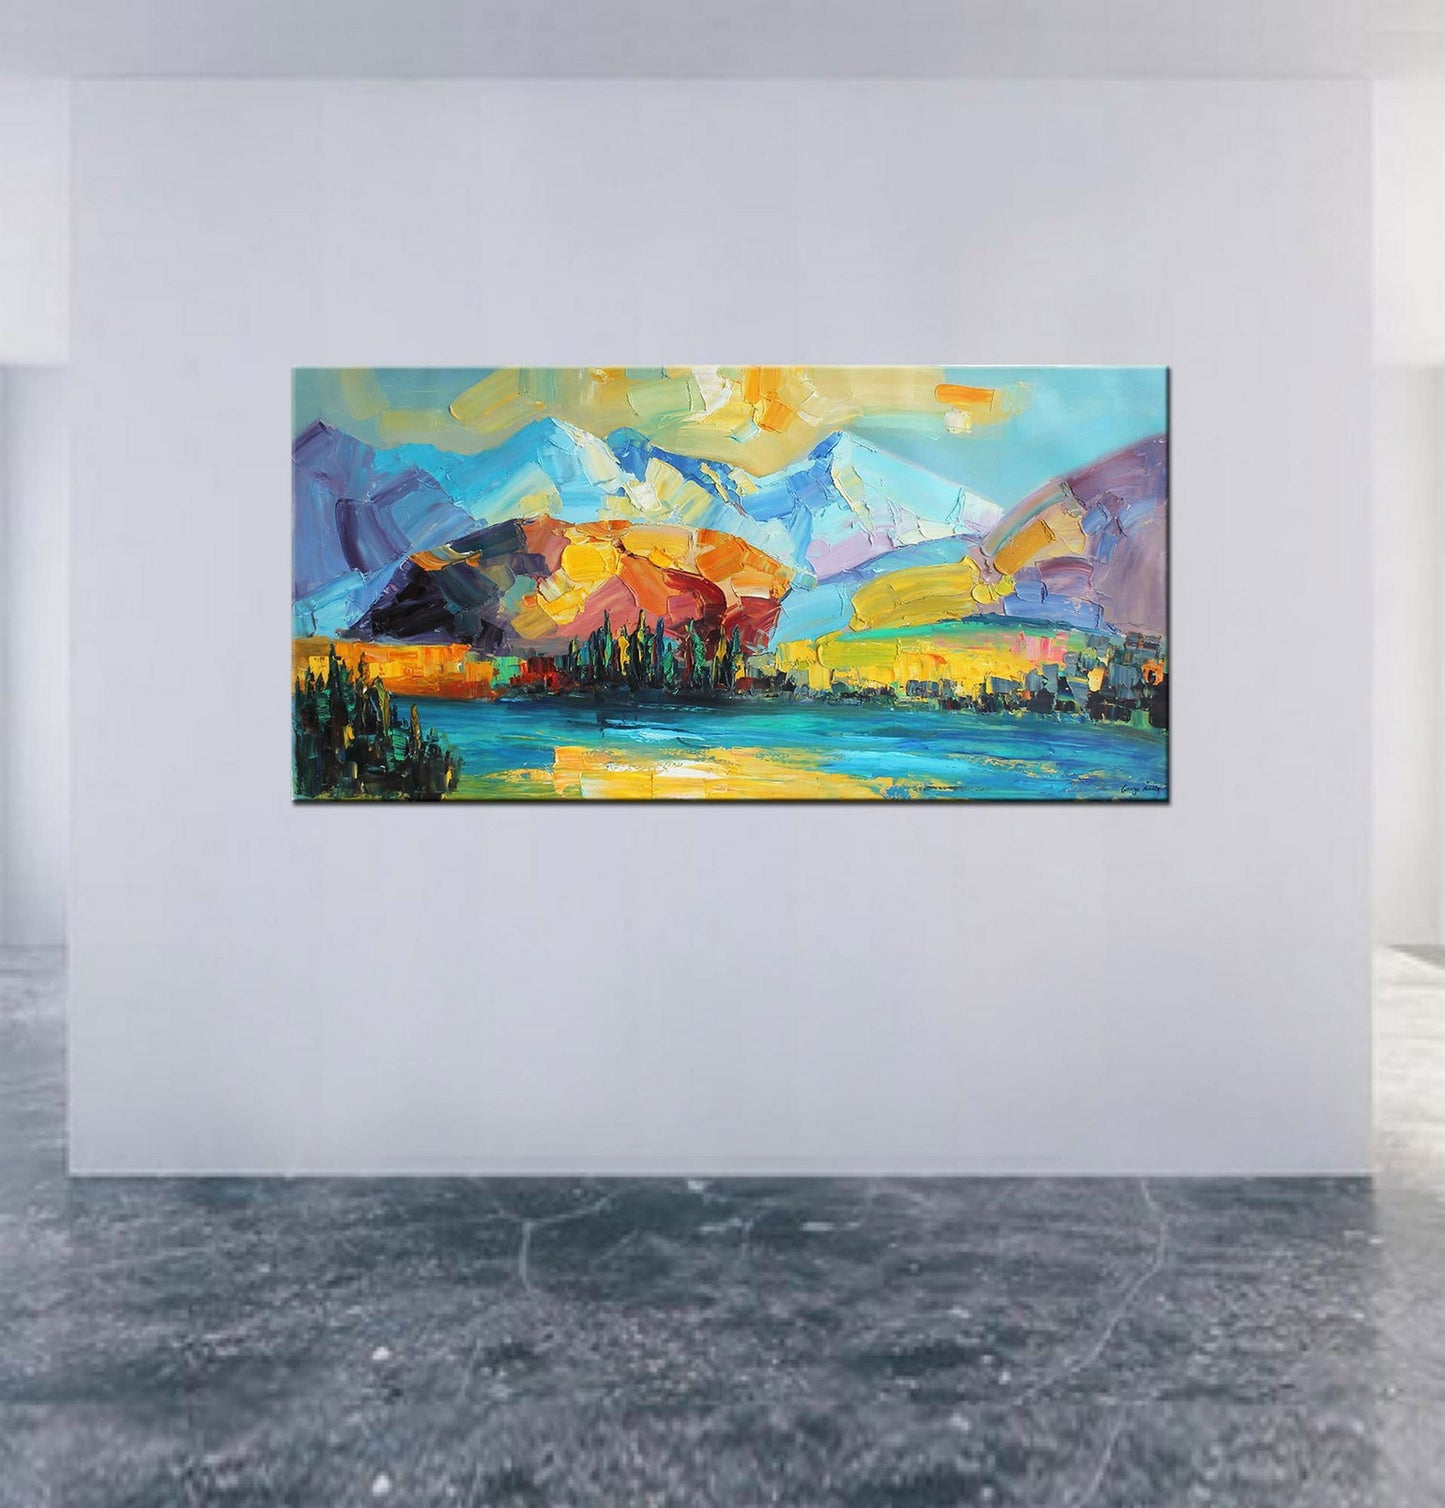 Abstract Landscape Painting, Large Art, Canvas Art, Large Landscape Painting, Master Bedroom Decor, Contemporary Art Large Wall Art Painting